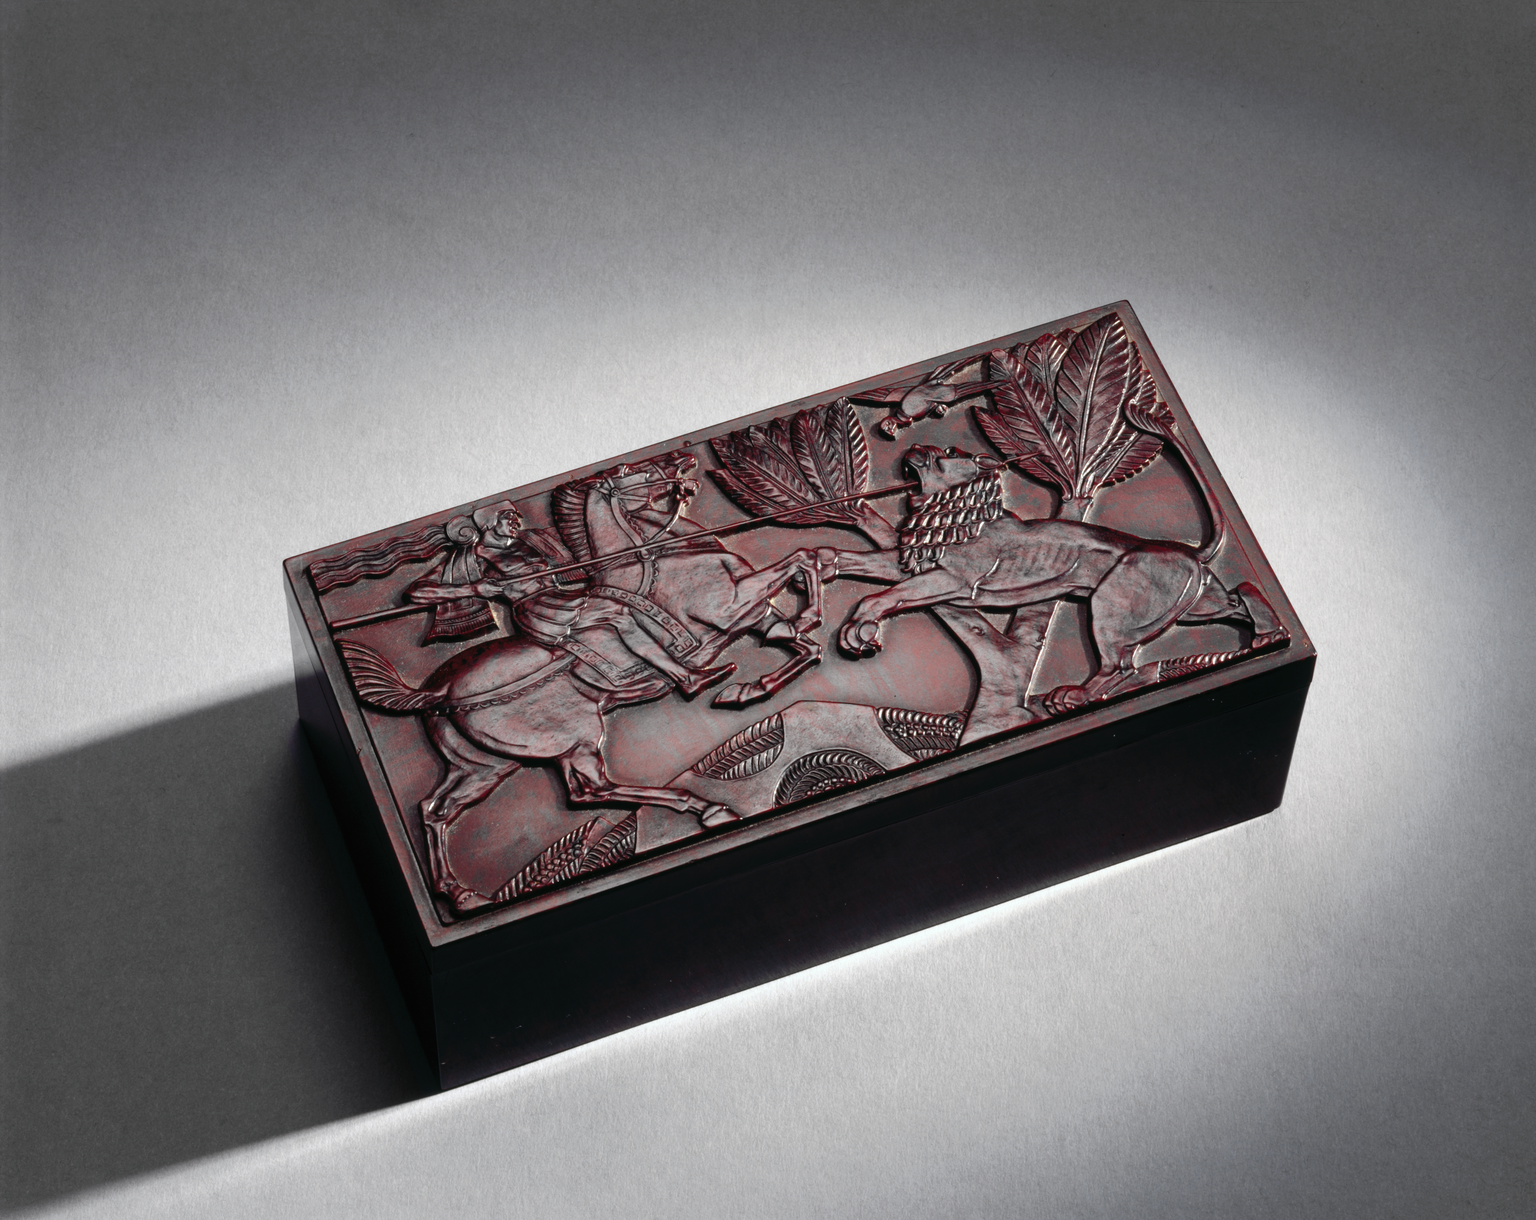 Rectangular cigarette box of imitiation walnut phenolic (Bakelite). Hinged lid decorated with moulded horseman spearing a lion in the Assyrian style, made by Birkby's Ltd., England, 1930s, under trade name "Elo Ware".